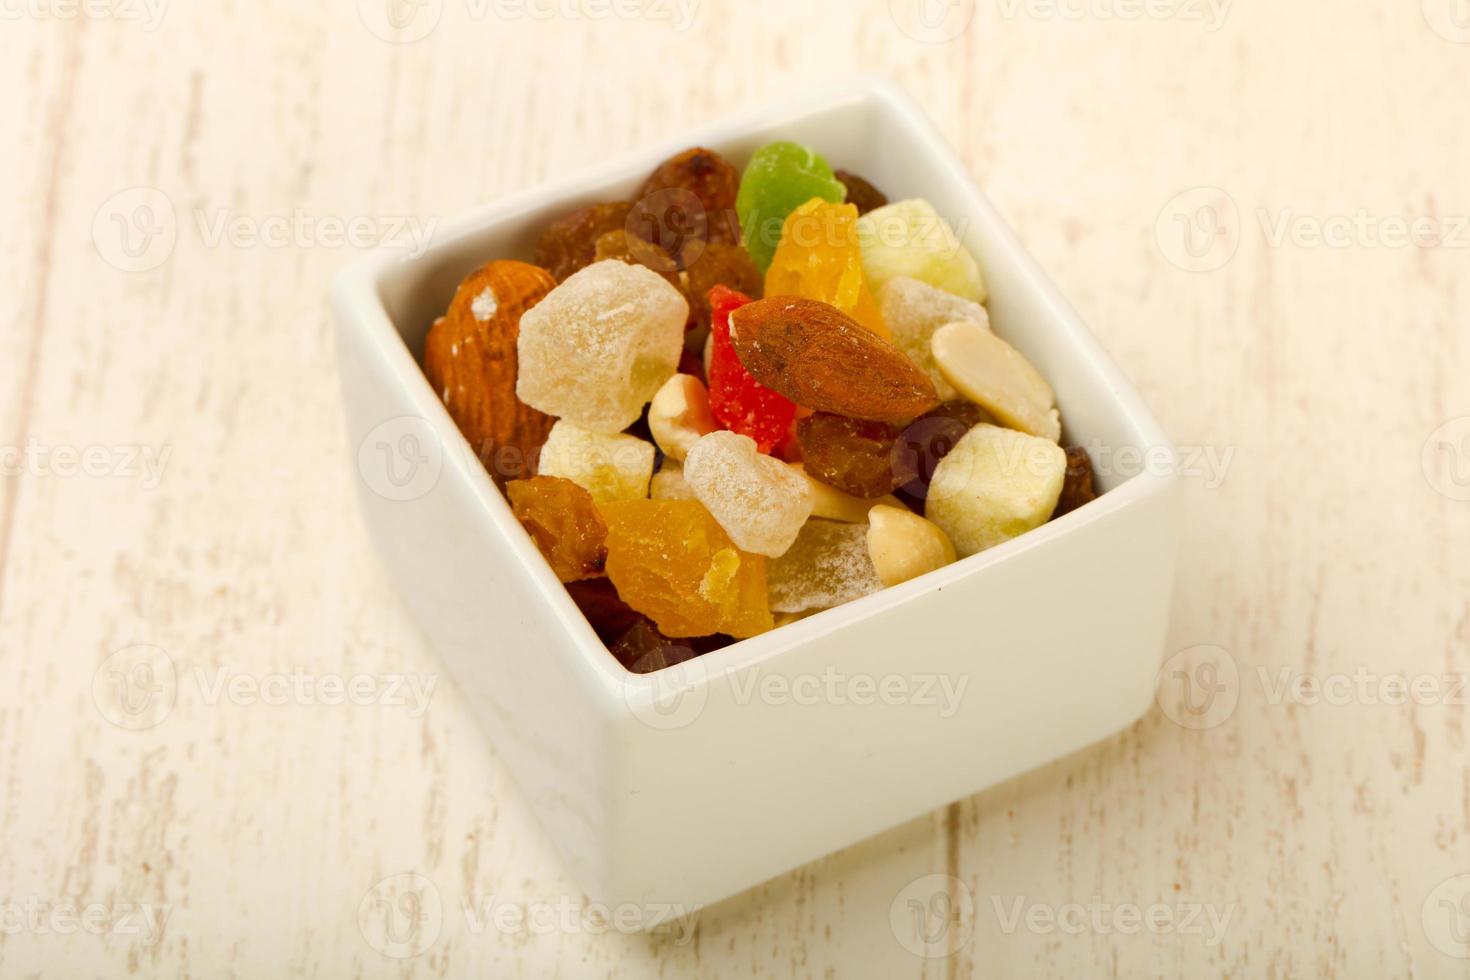 Nut and dry fruits photo